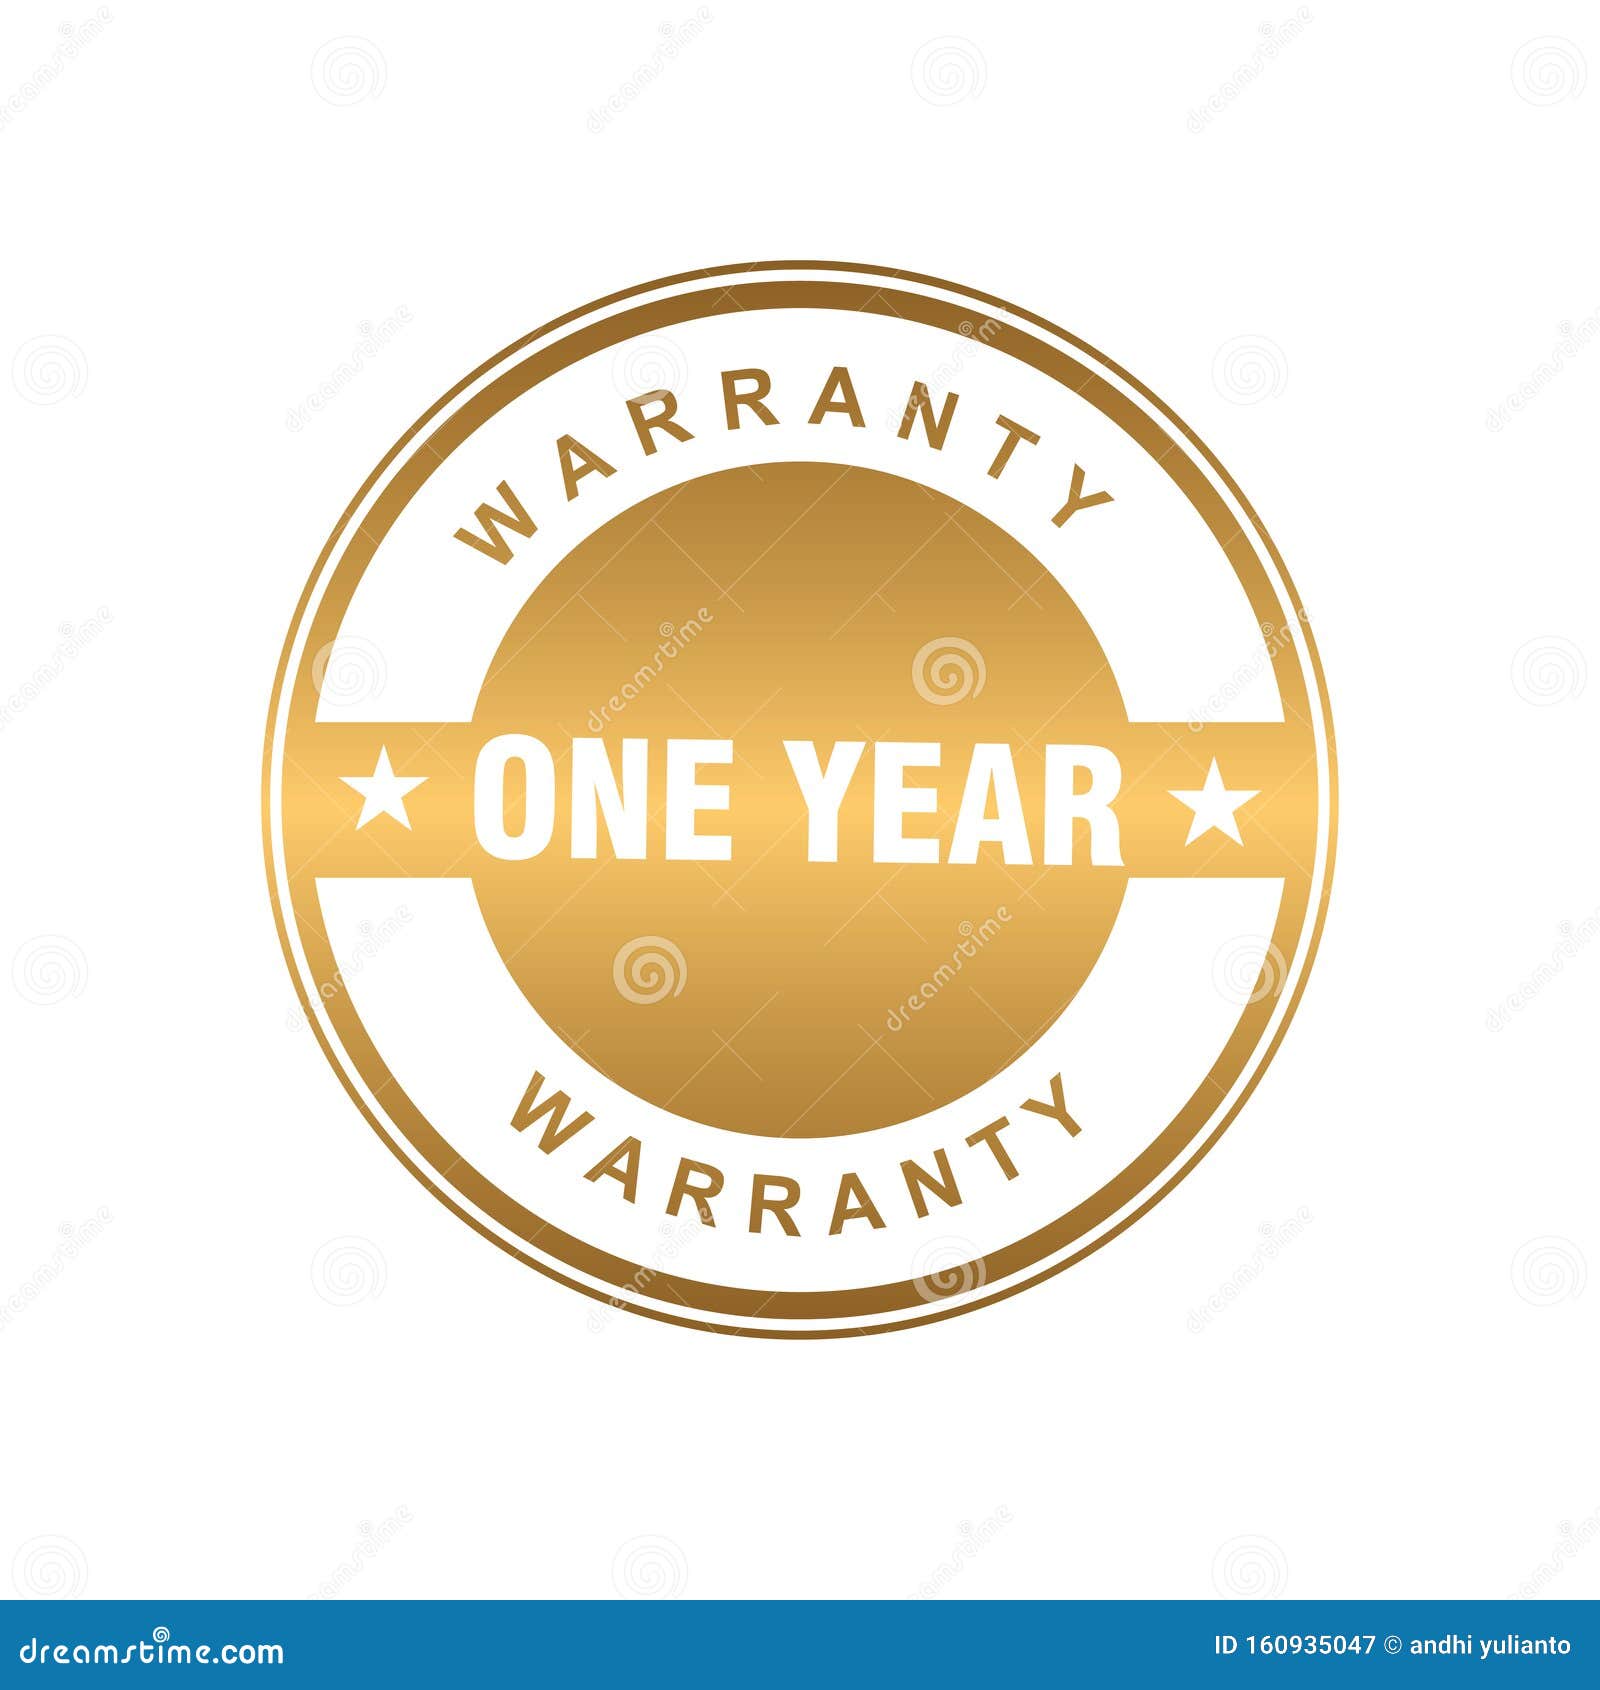 gold-one-year-warranty-badge-or-medal-for-product-attribution-vector